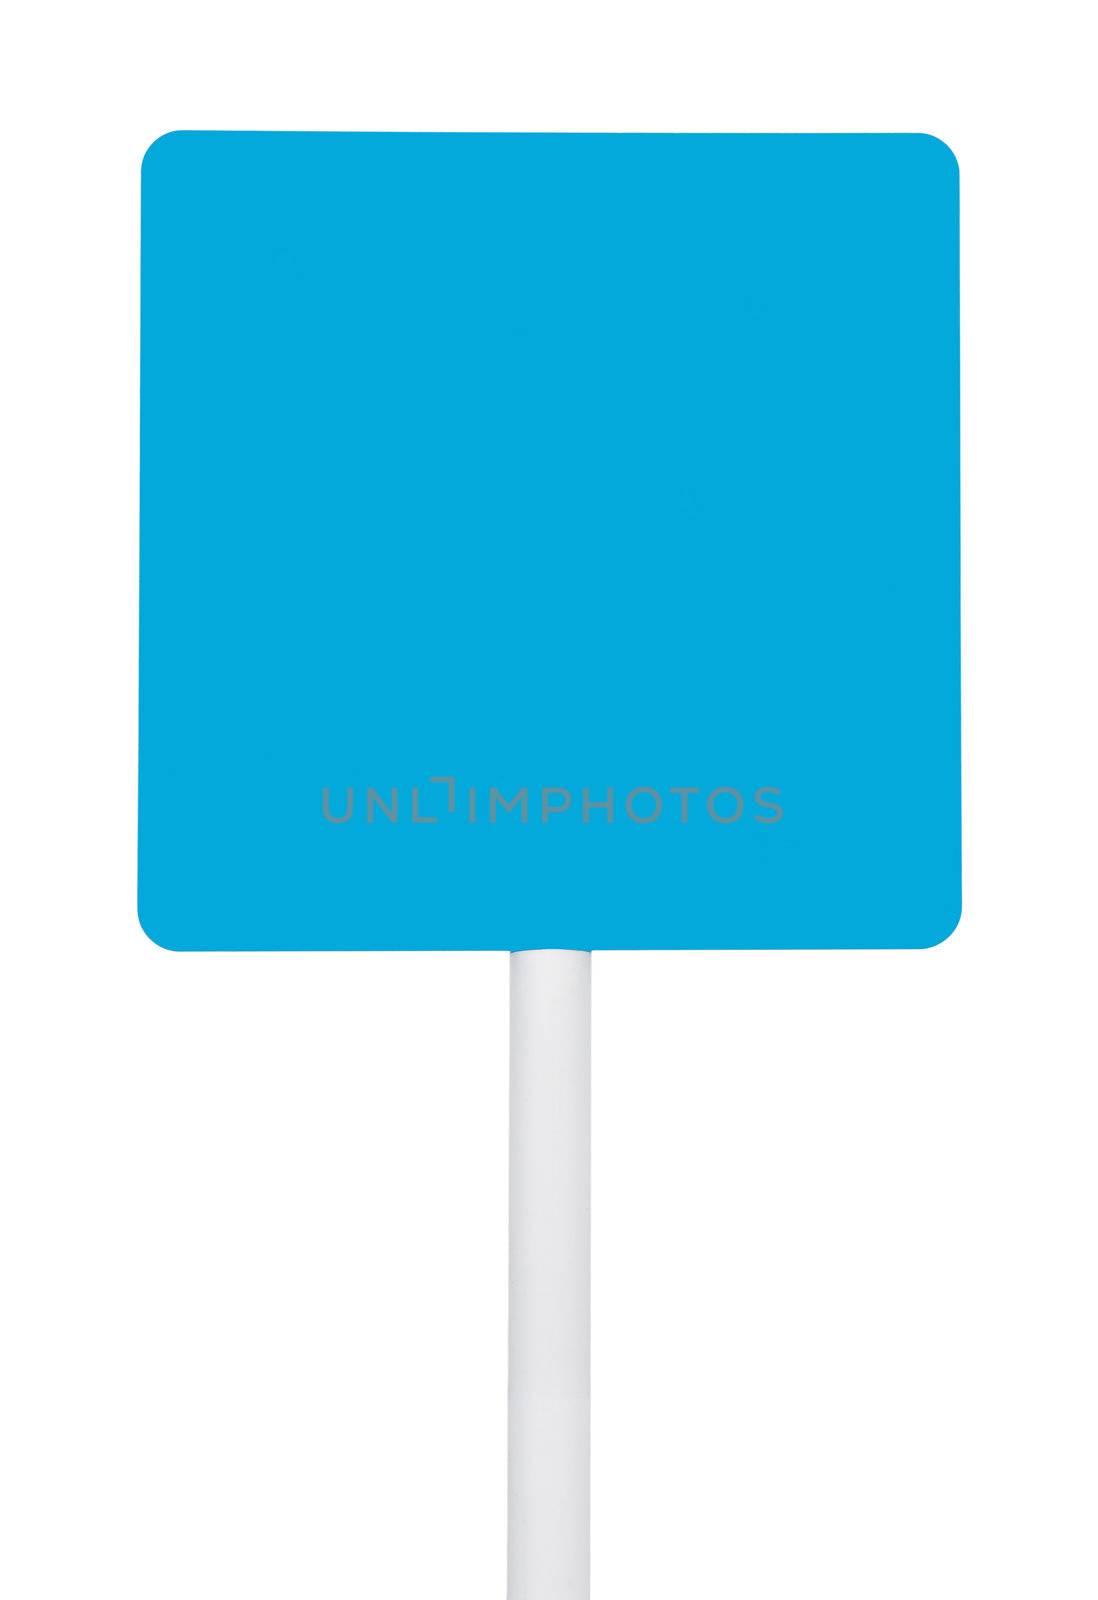 blue square sign on post pole (isolated on white background, ready for your design)